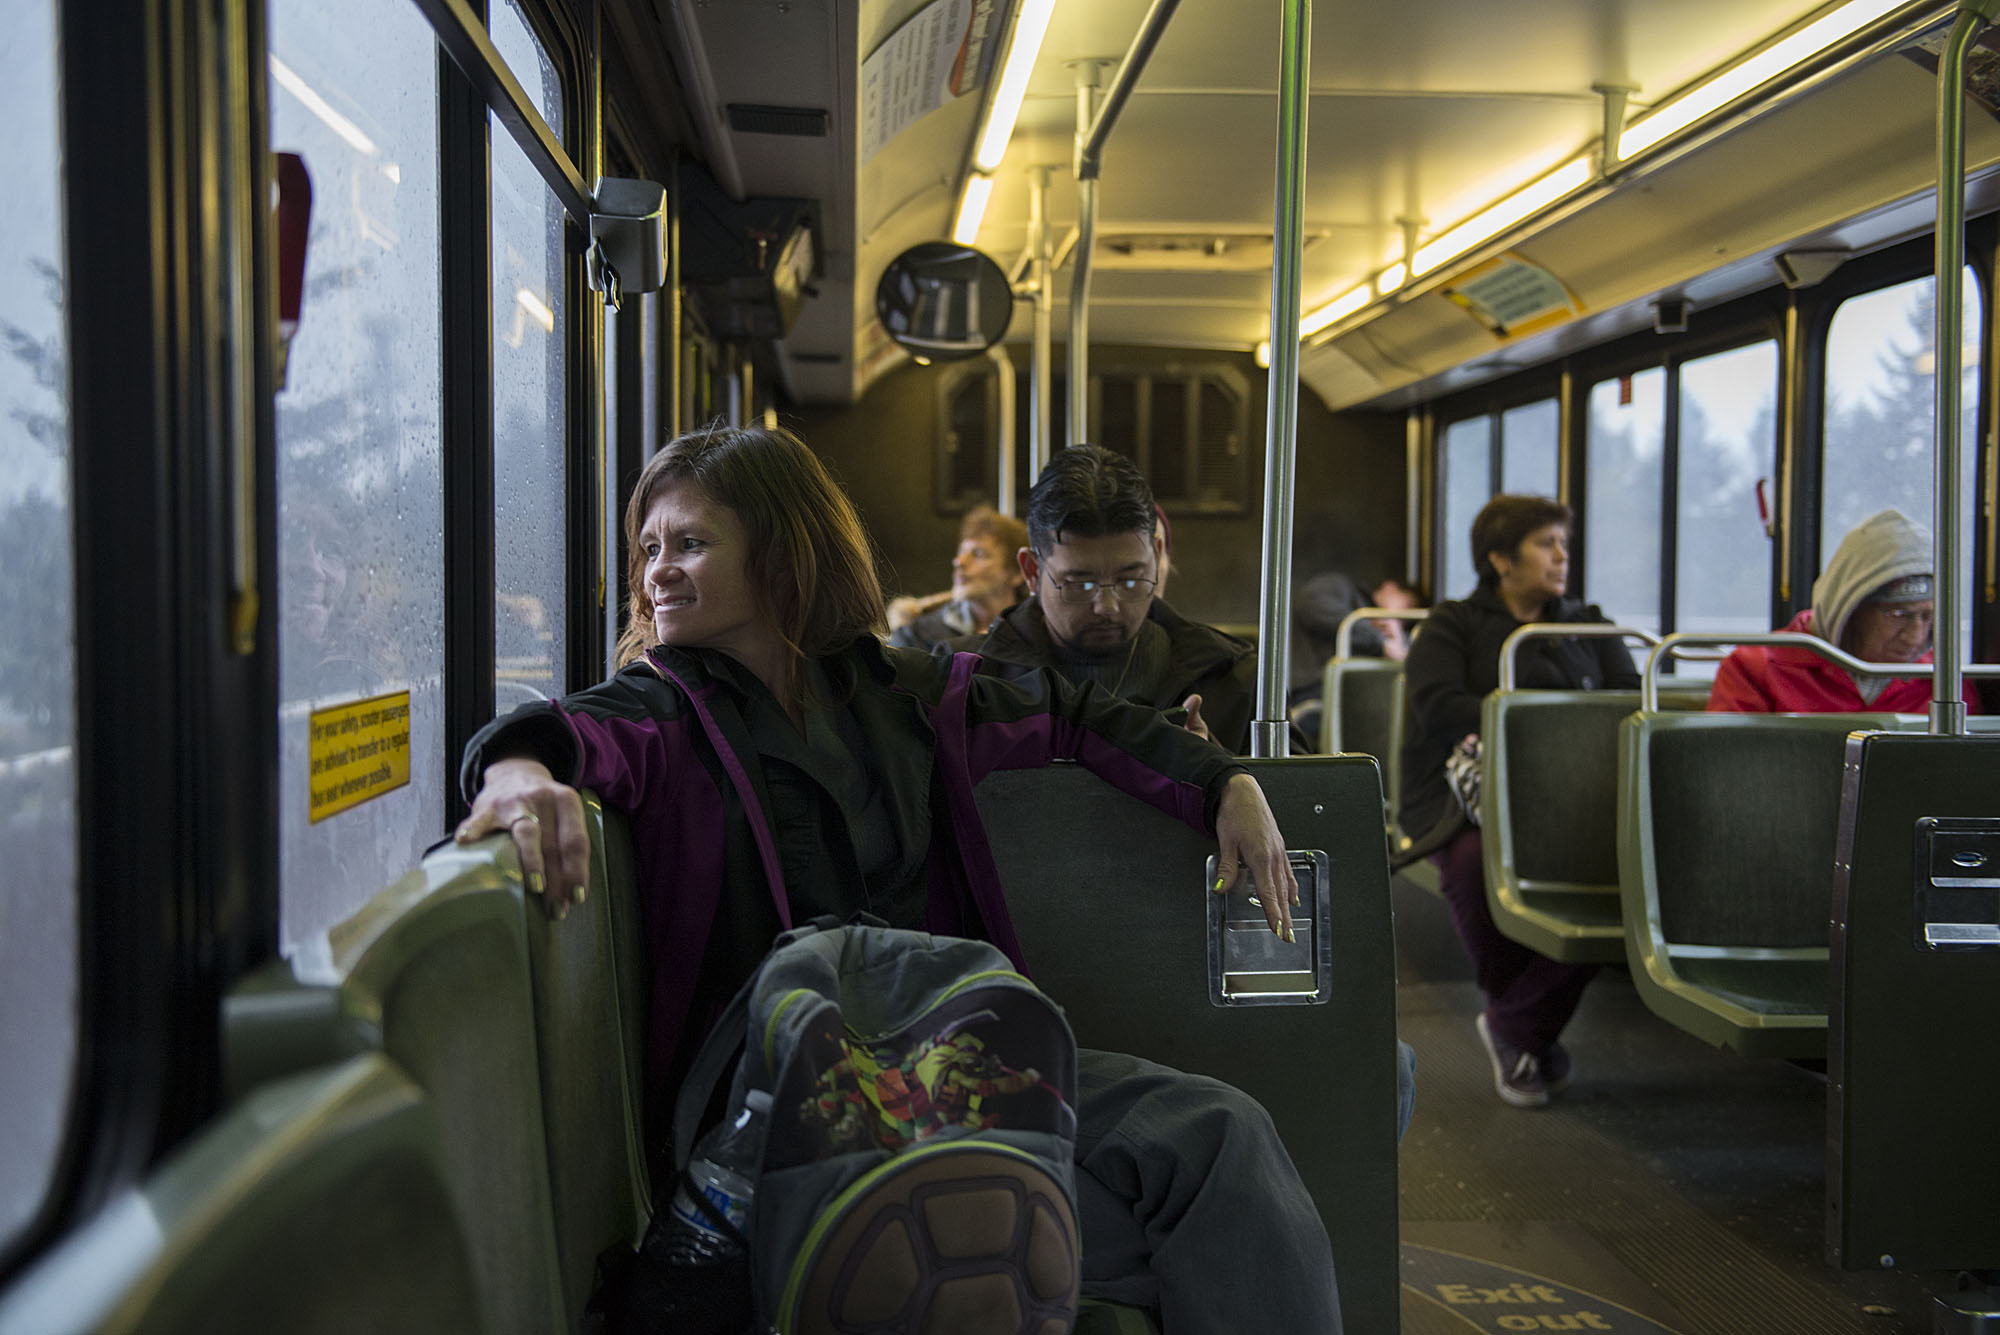 Donna Pinaula catches a ride on a Vancouver bus after applying for a job Tuesday afternoon, Nov. 17, 2015. The bus is a lifeline for Pinaula, who does not have a car and gets around town by riding public transportation, getting rides from people or walking. (Amanda Cowan/The Columbian)